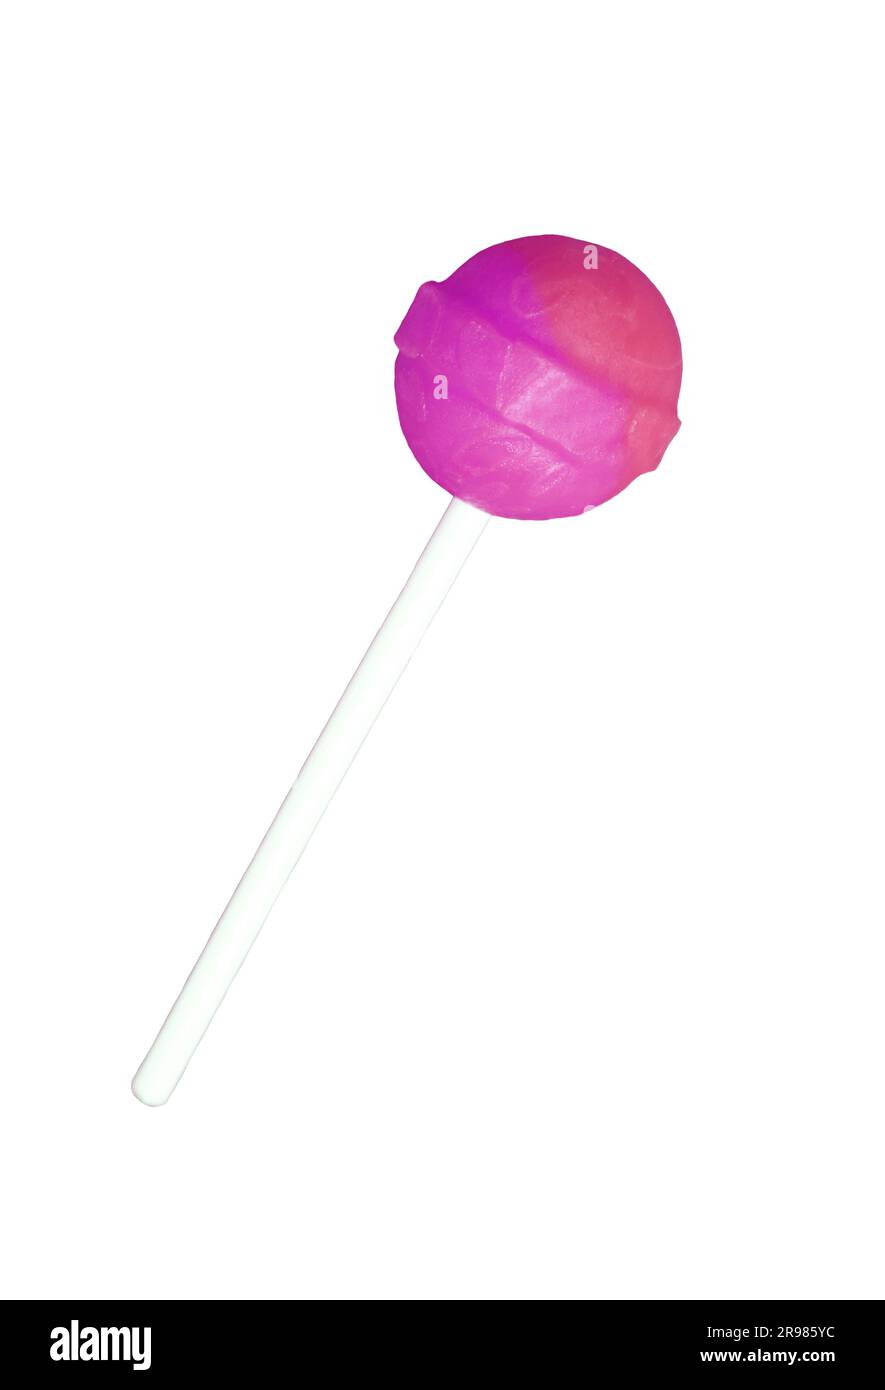 Pink and Purple Lollipop Candy Isolated on White Background Stock Photo